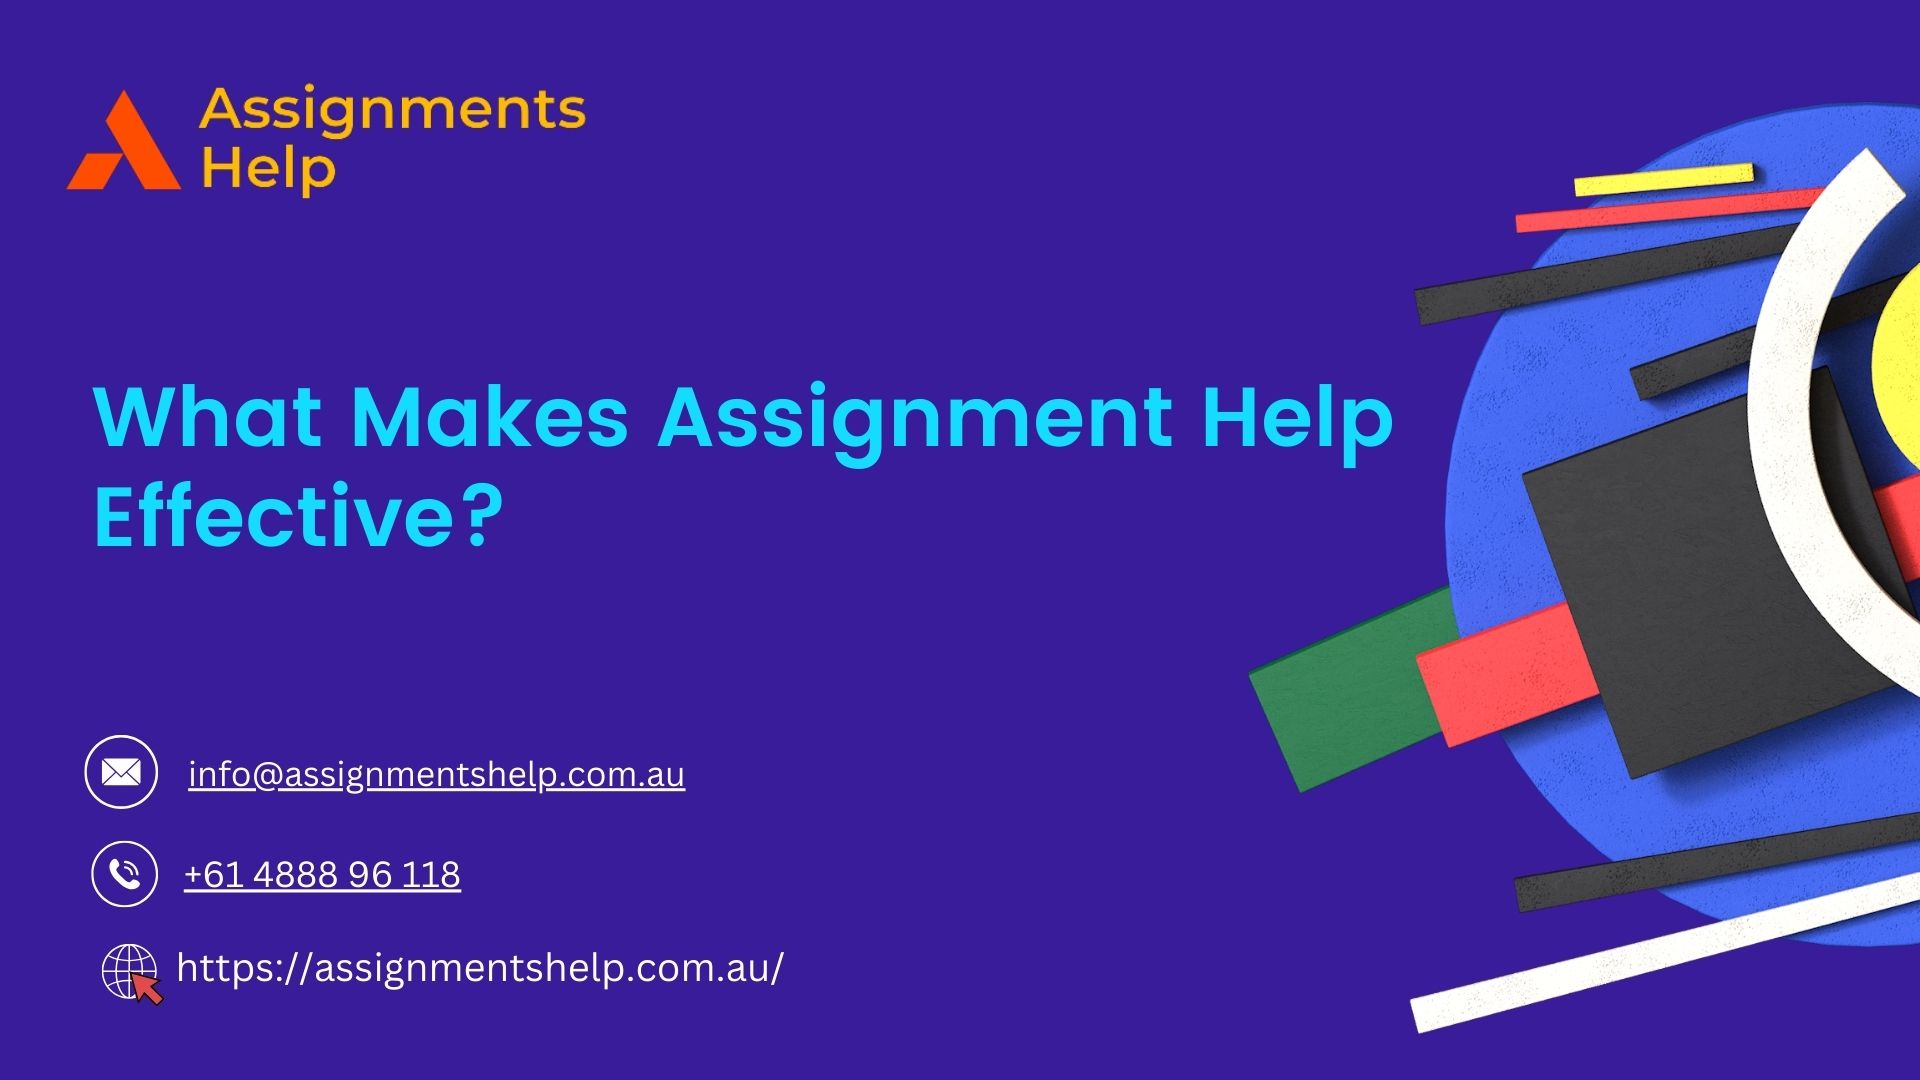 What Makes Assignment Help Effective?